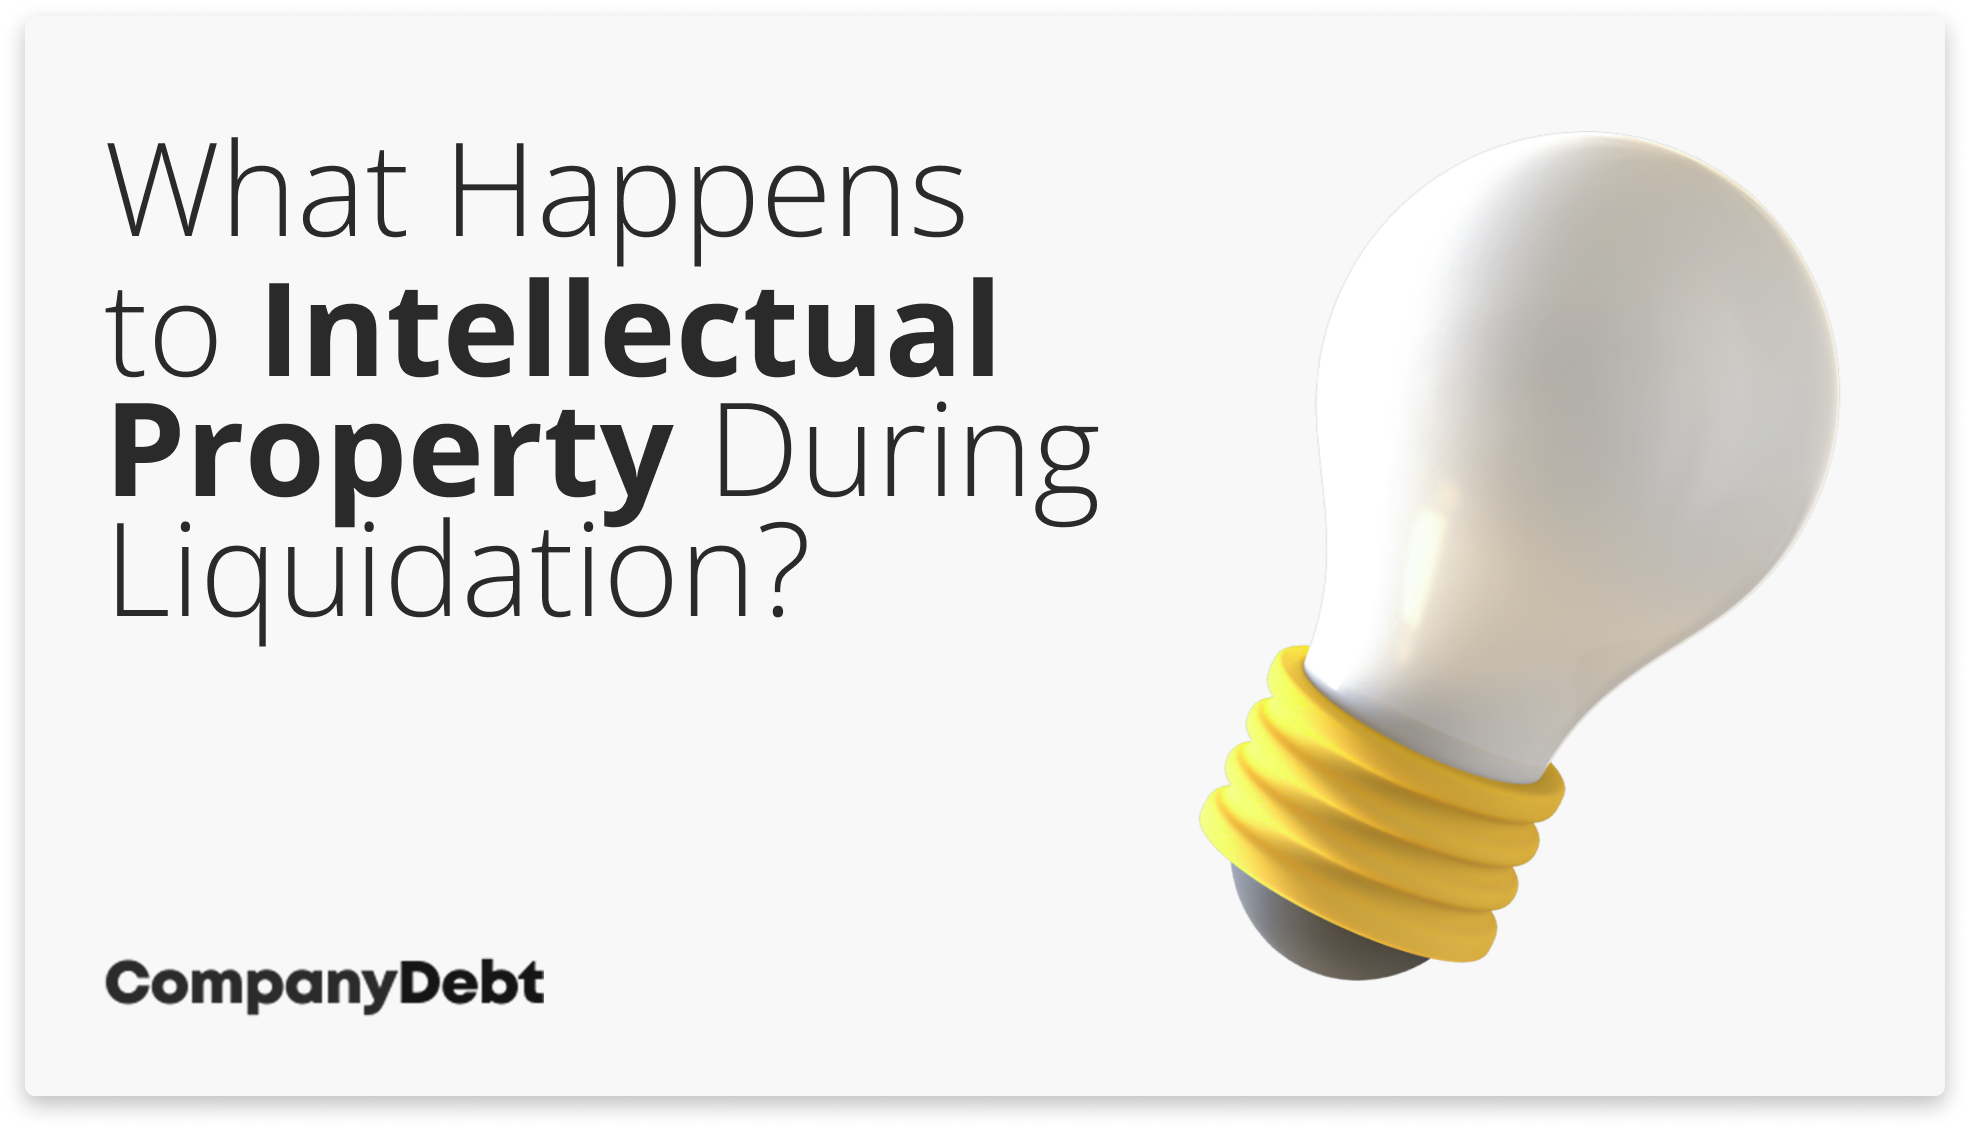 What Happens to Intellectual Property During Liquidation?